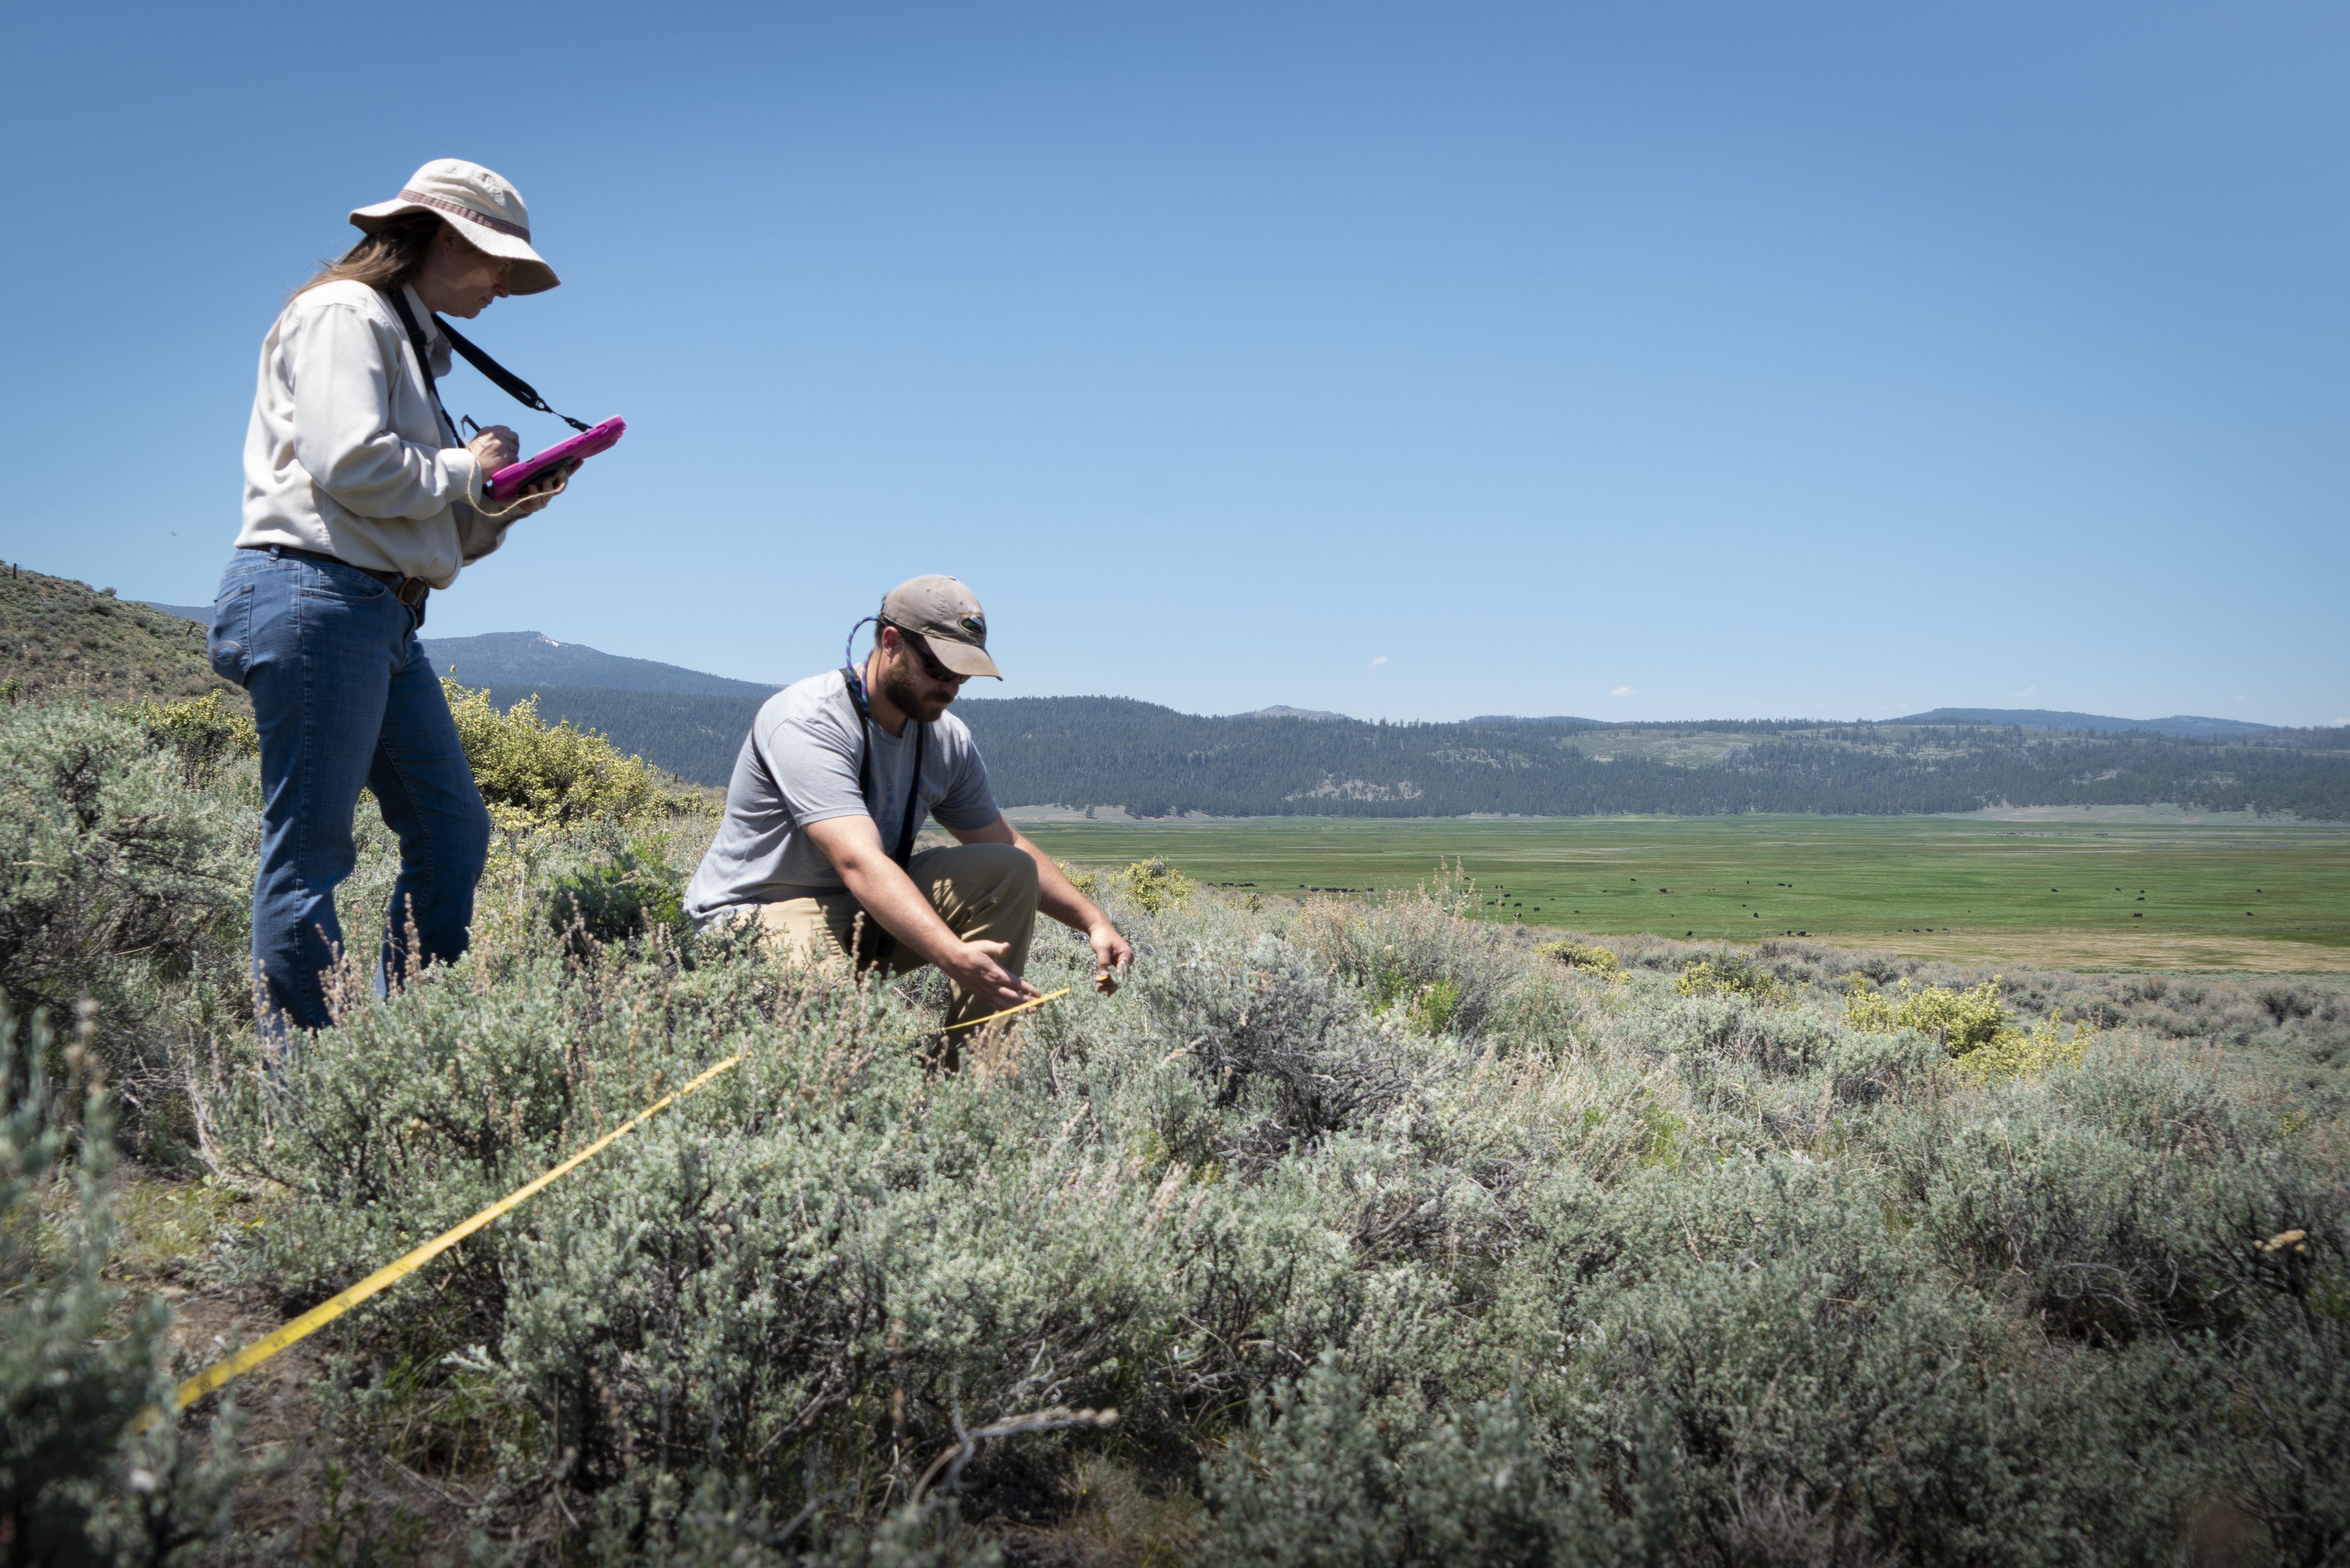 Two people measuring sagebrush. A woman holds a tablet and a man uses a measuring tape.